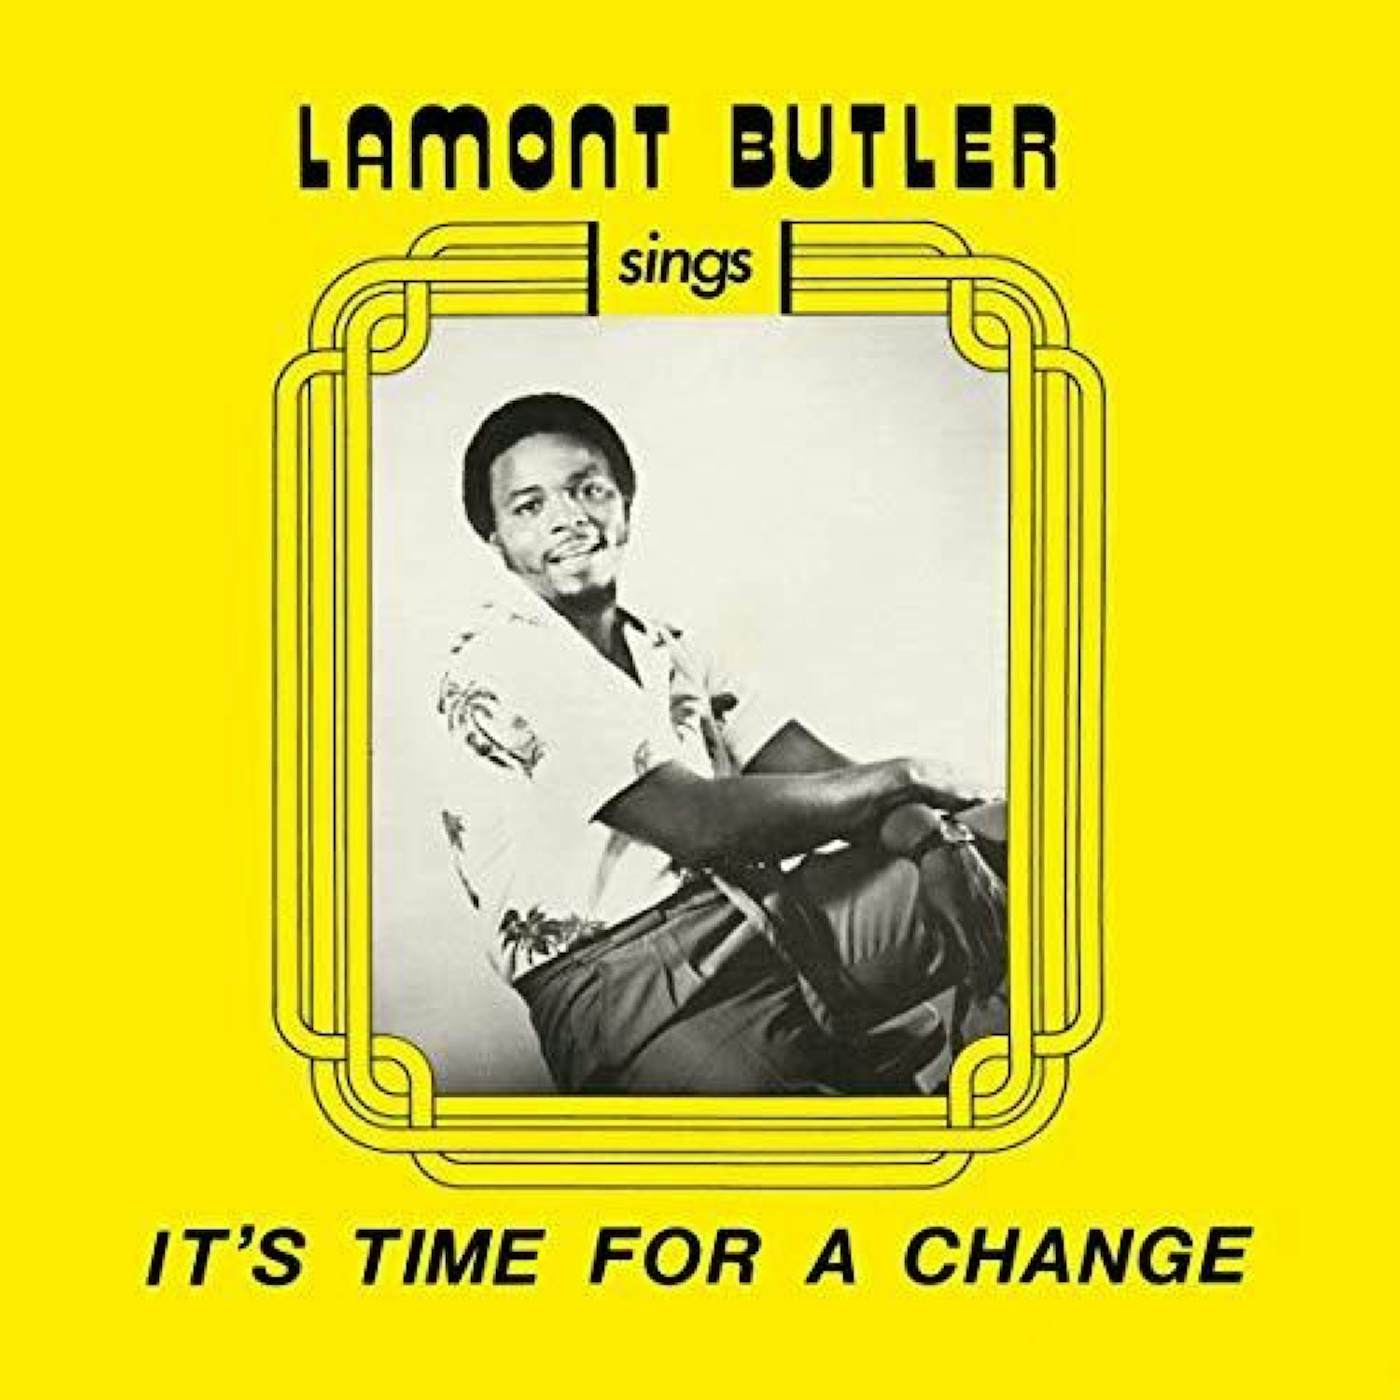 Lamont Butler It's Time For A Change Vinyl Record